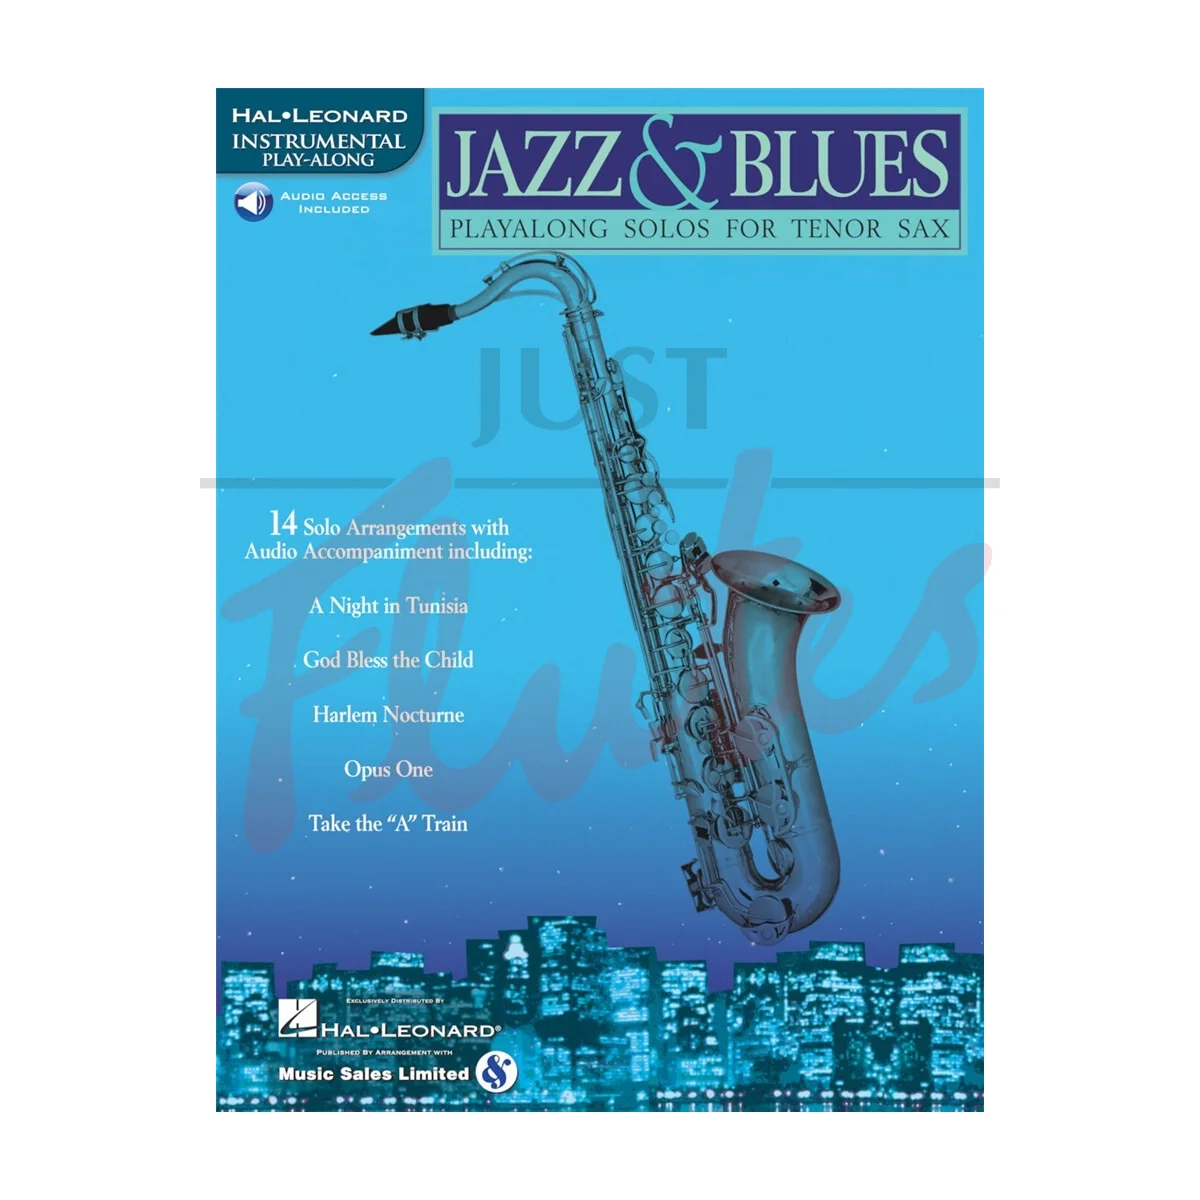 Jazz &amp; Blues Playalong Solos for Tenor Saxophone